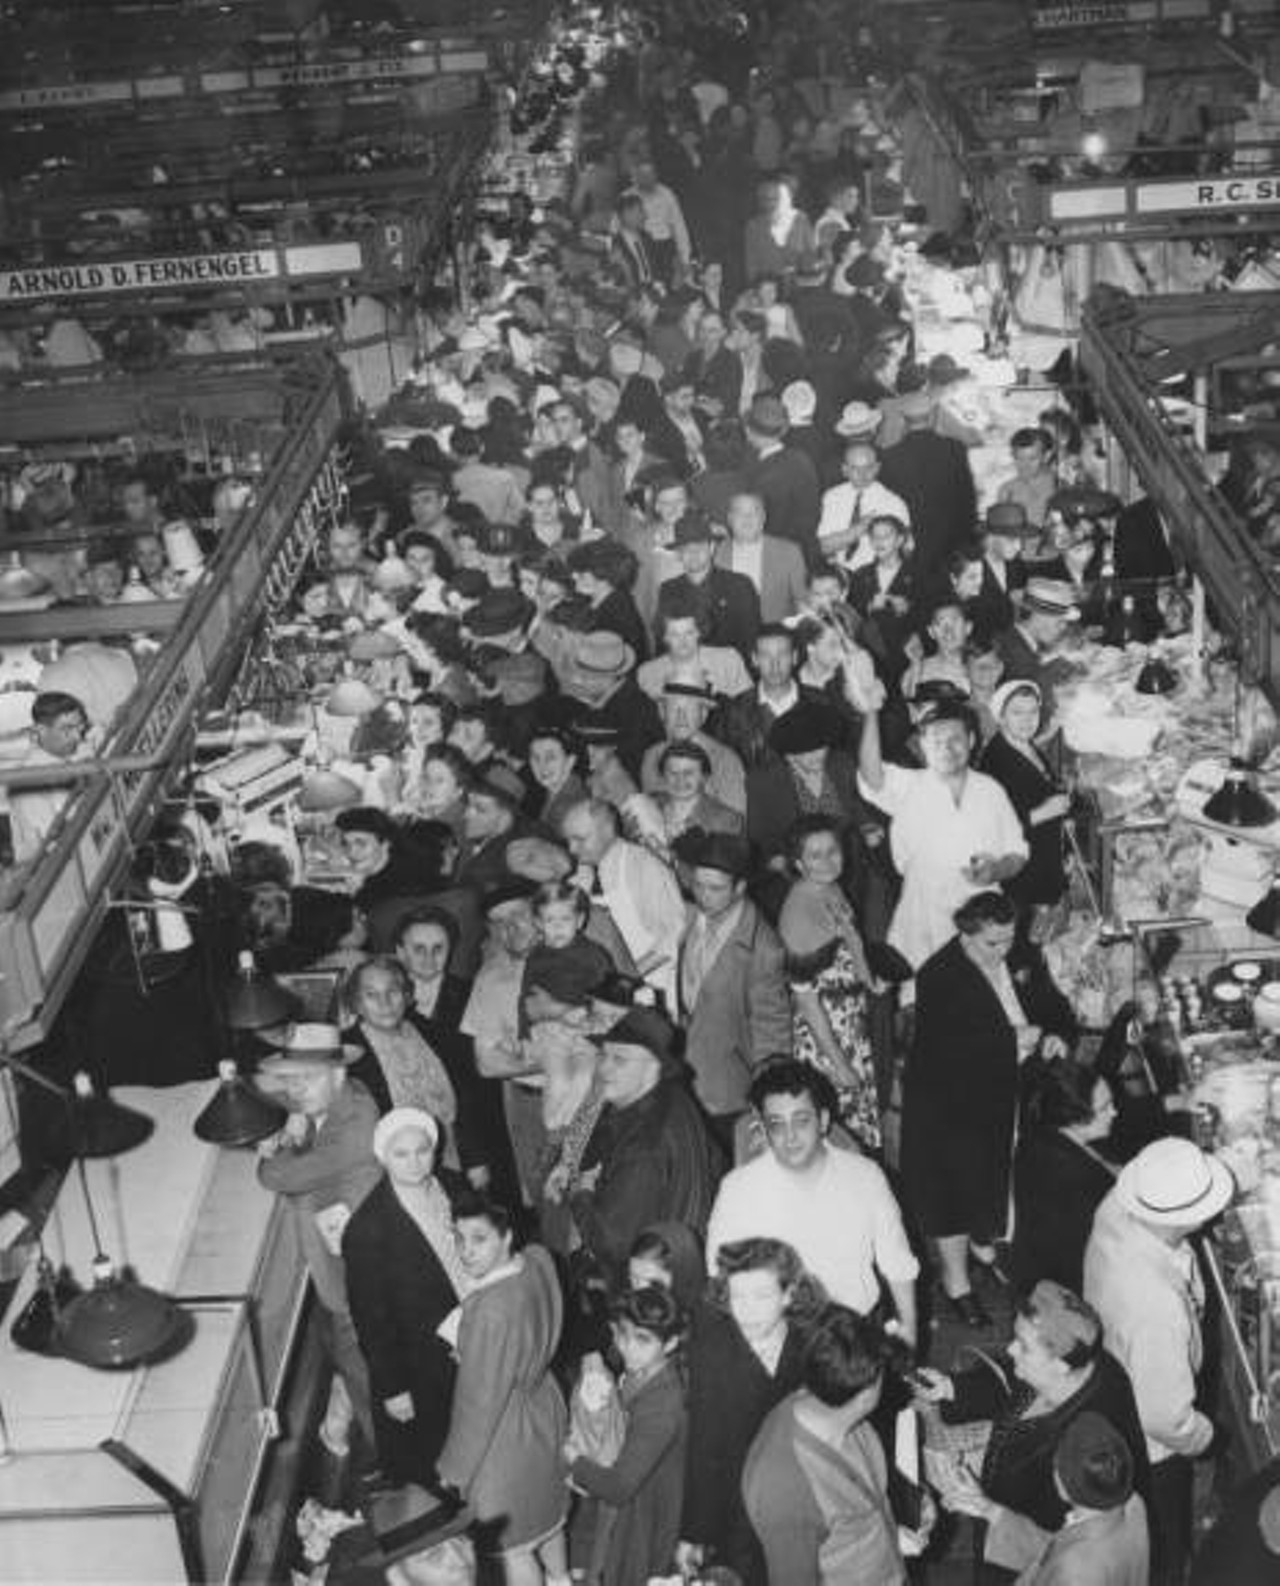 Looking down from balcony towards crowded market floor. Shoppers are looking up to the camera. Visible sign for Arnold D. Fernengel, R. Ashby, Herbert J. Fix, and Wm Moellering.. c. 1946